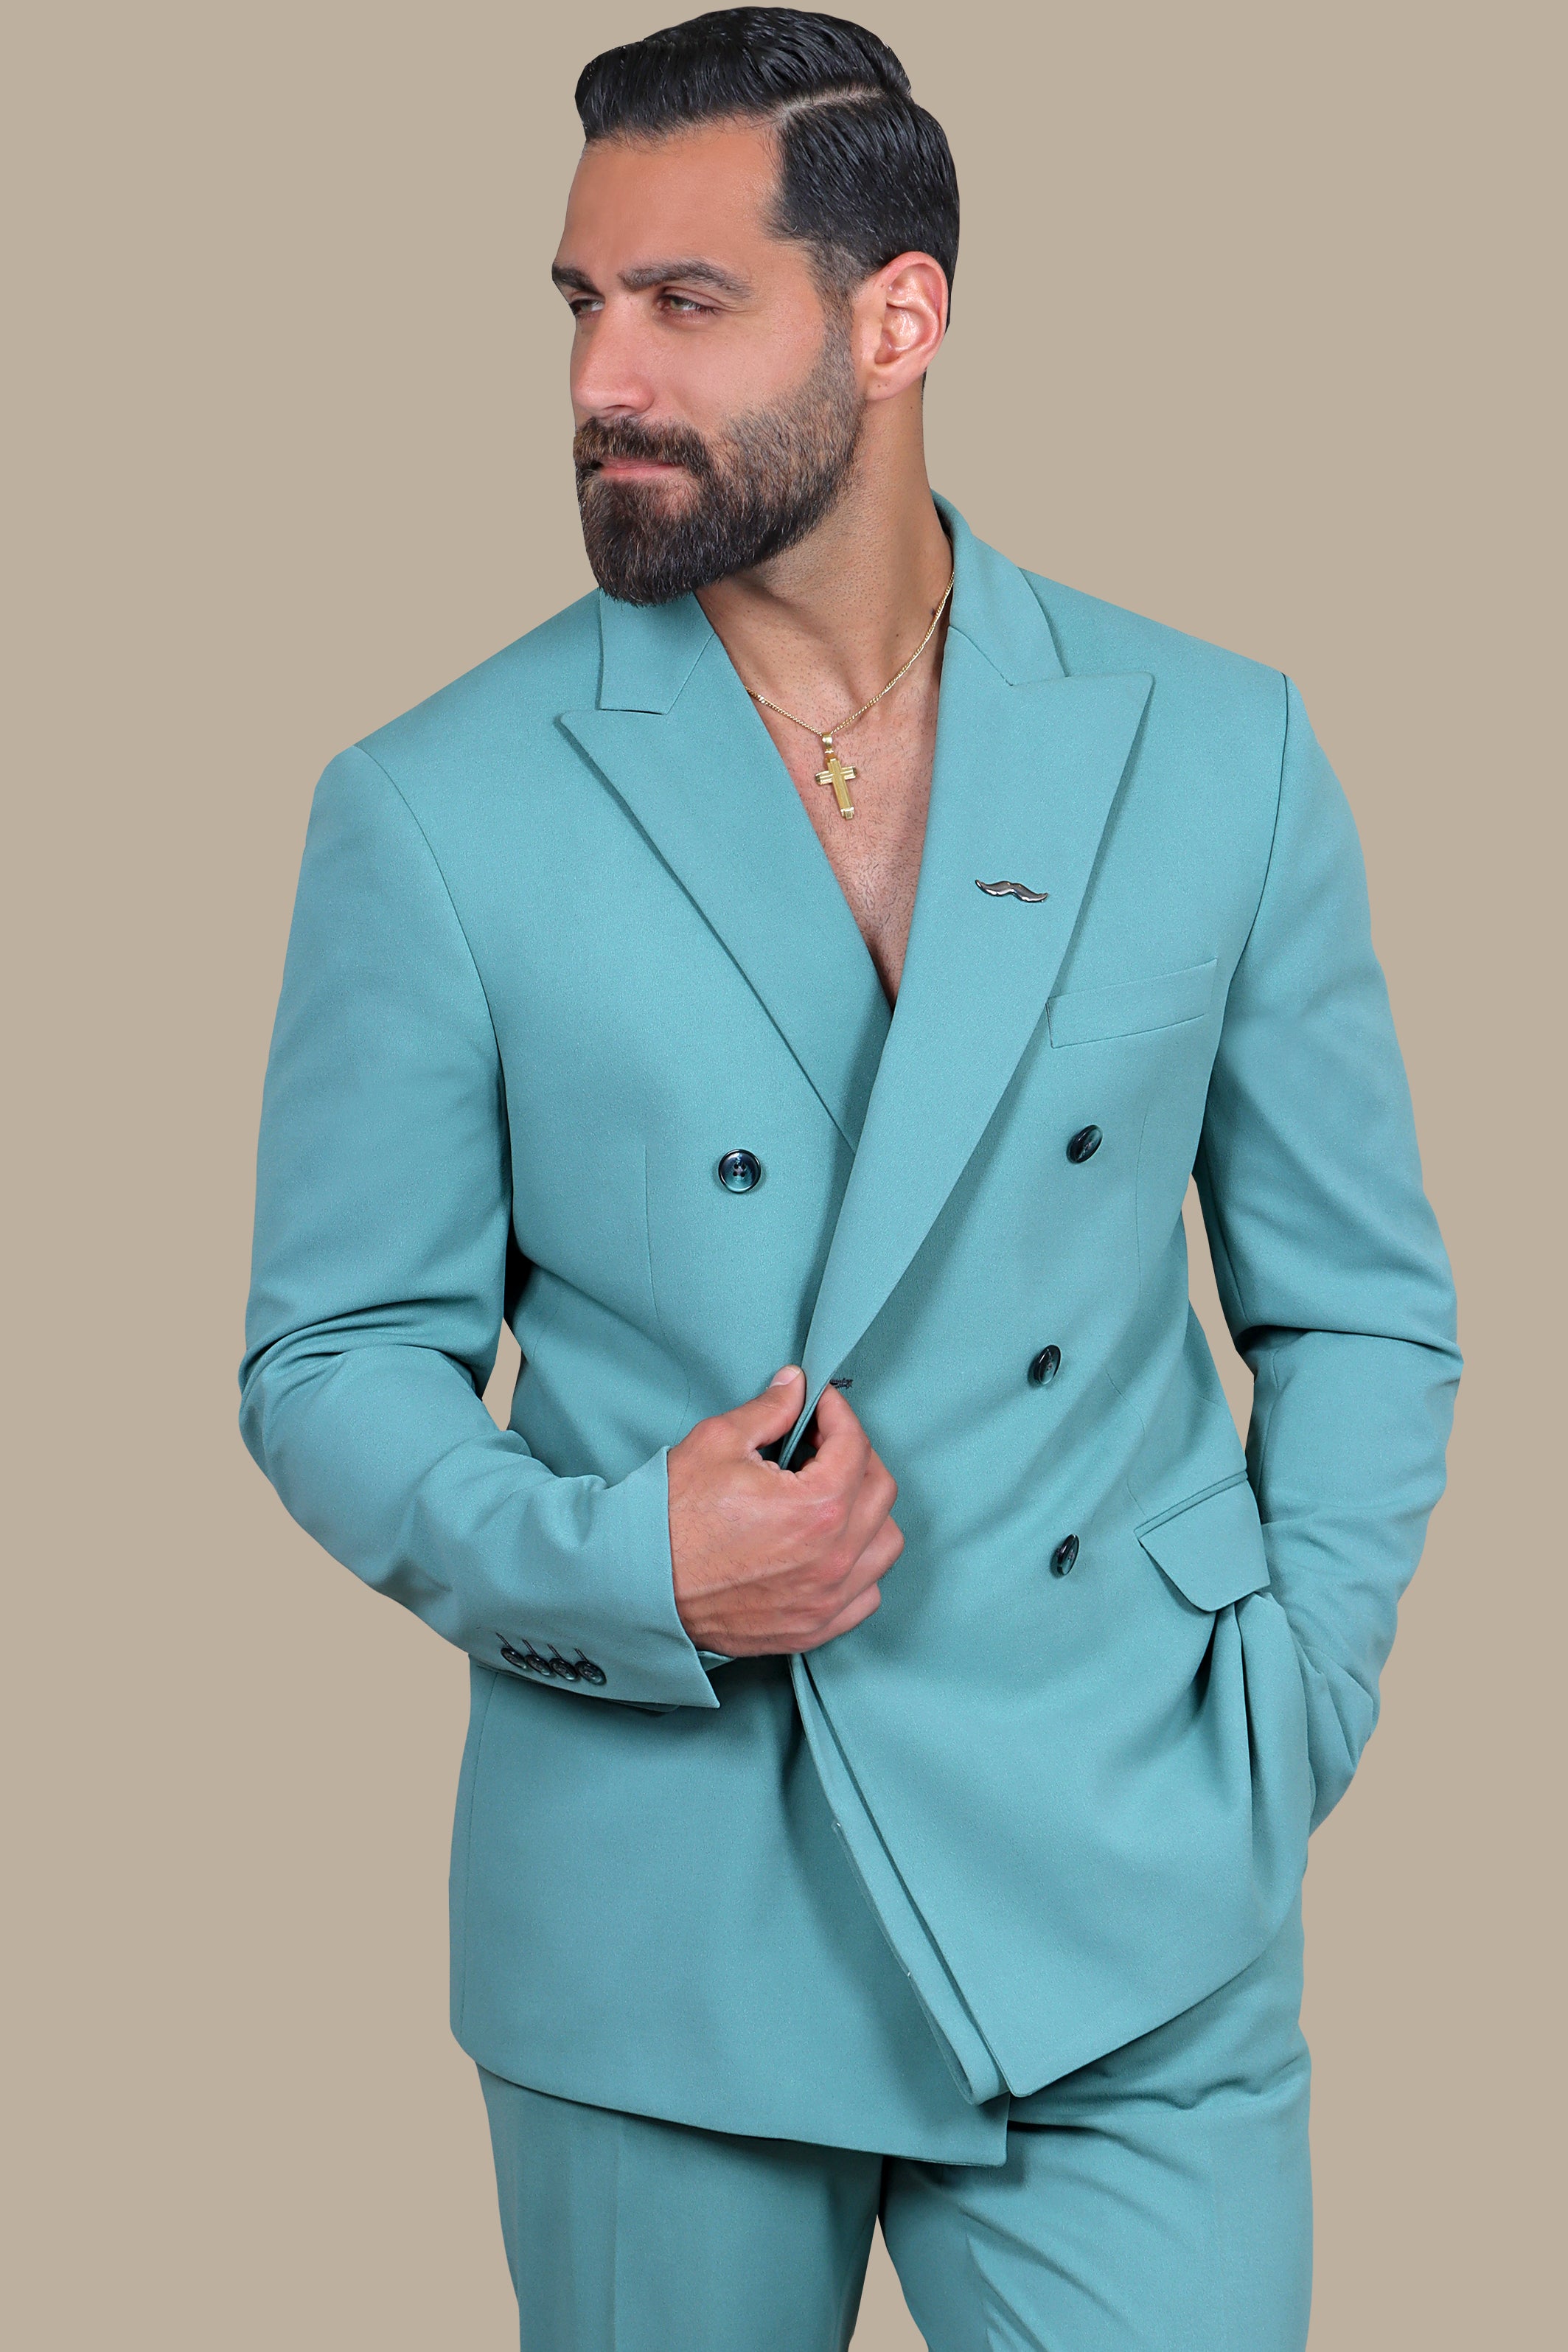 Frontier Elegance: FV Suit with Front-Facing Sleeves